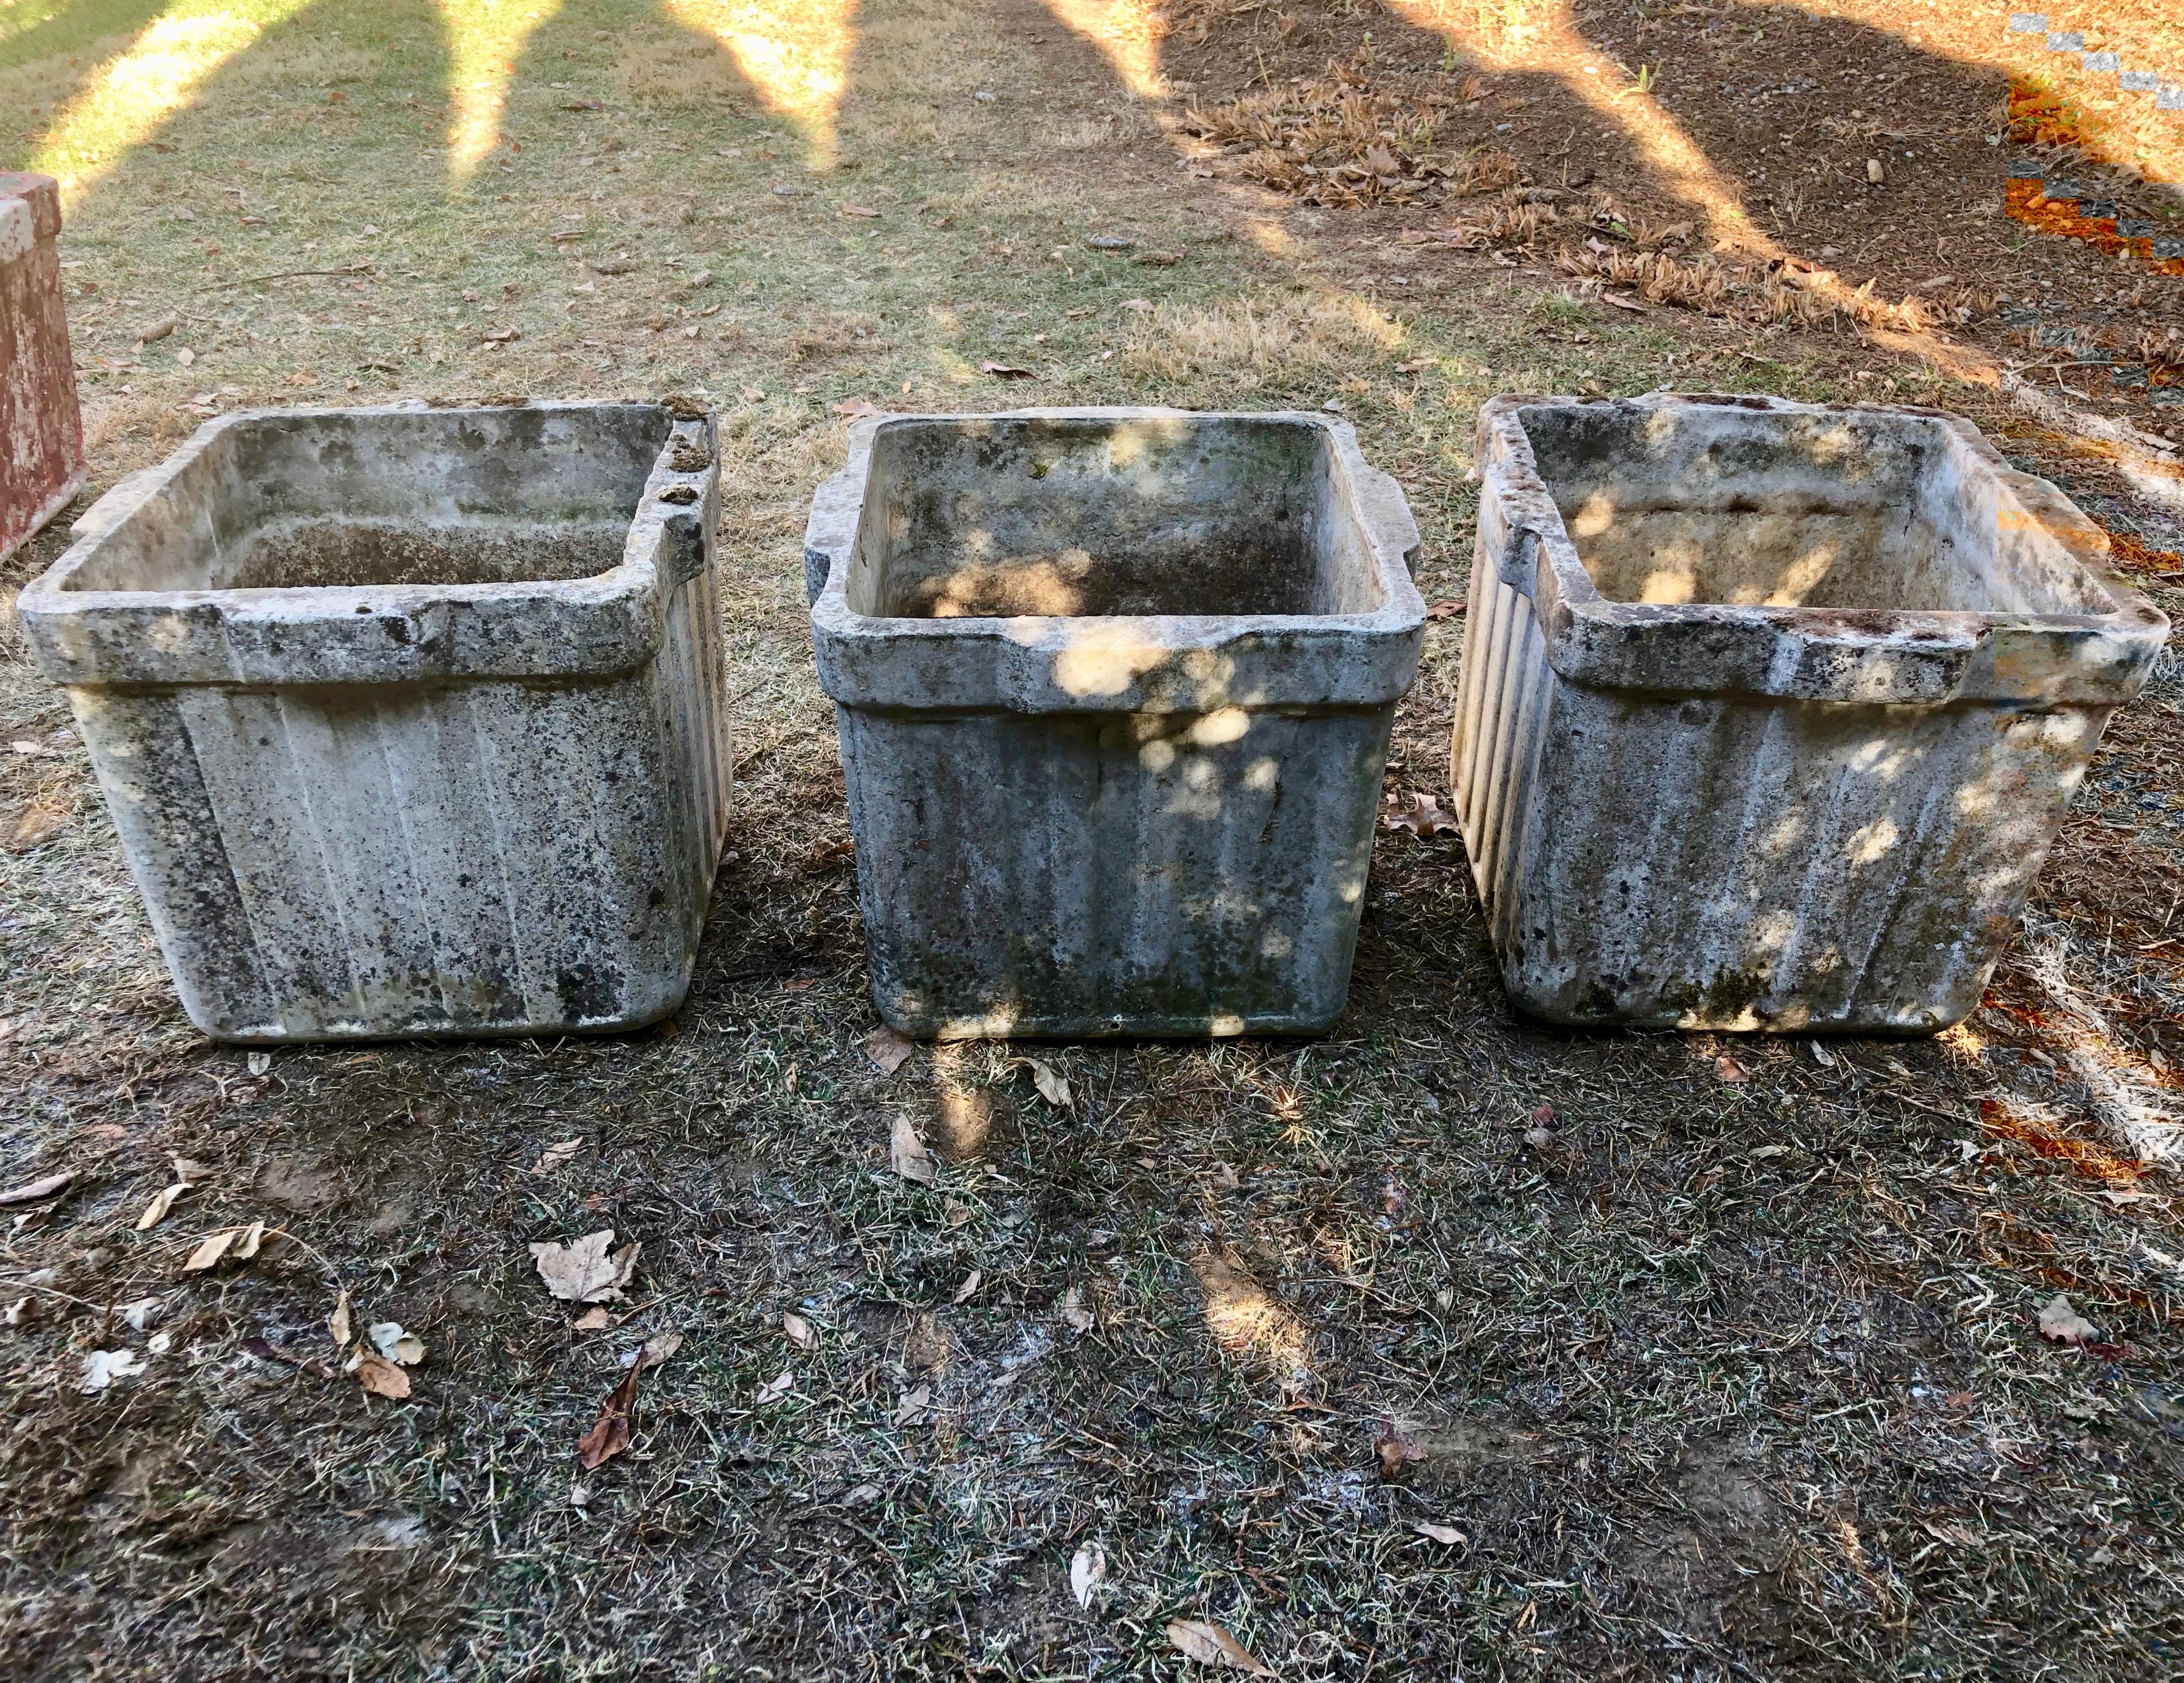 These ribbed planters with integral handles on all four sides were designed by the iconic Willy Guhl and produced by Eternit of Switzerland in three sizes. These are the medium-sized ones. In outstanding structural condition, they feature an